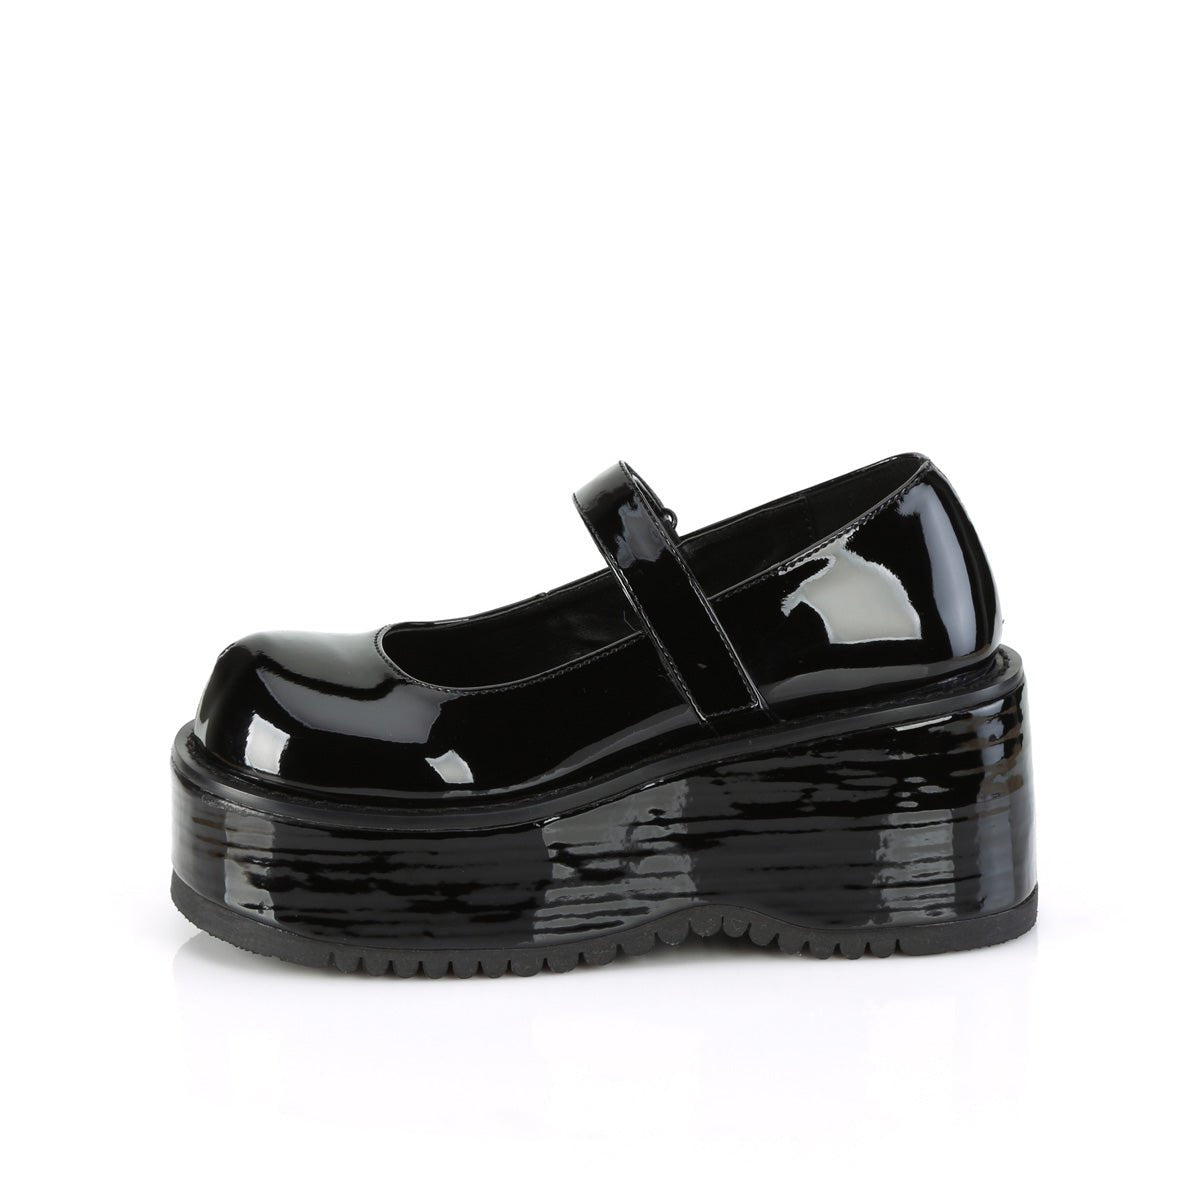 Too Fast | Demonia Dollie 01 | Black Patent Leather Women's Mary Janes